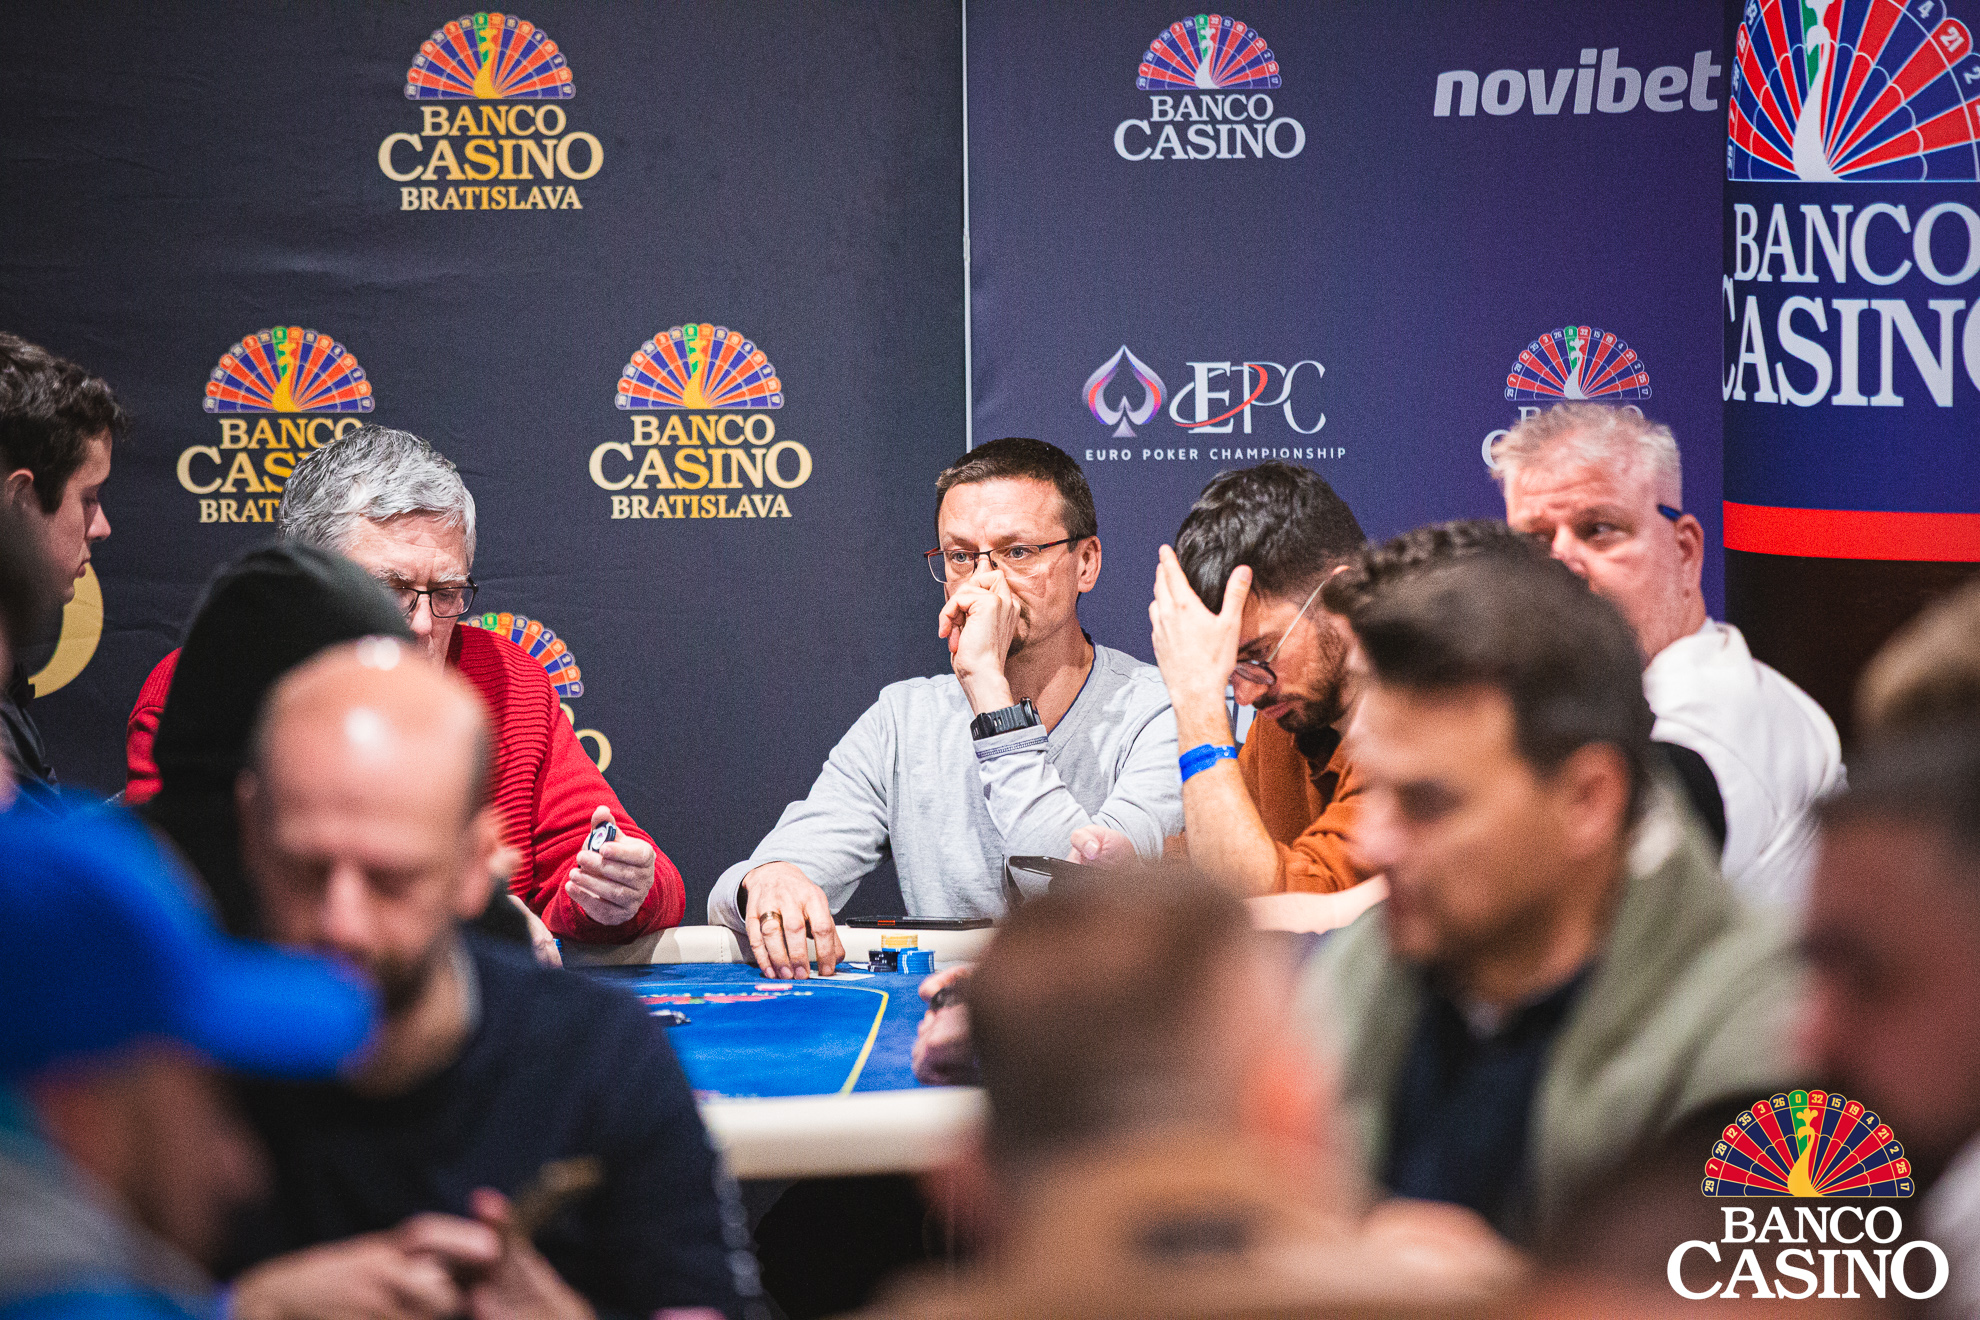 EURO POKER CHAMPIONSHIP MAIN EVENT €400,000 GTD AT BANCO CASINO HAS FIRST OPENING DAY OVER